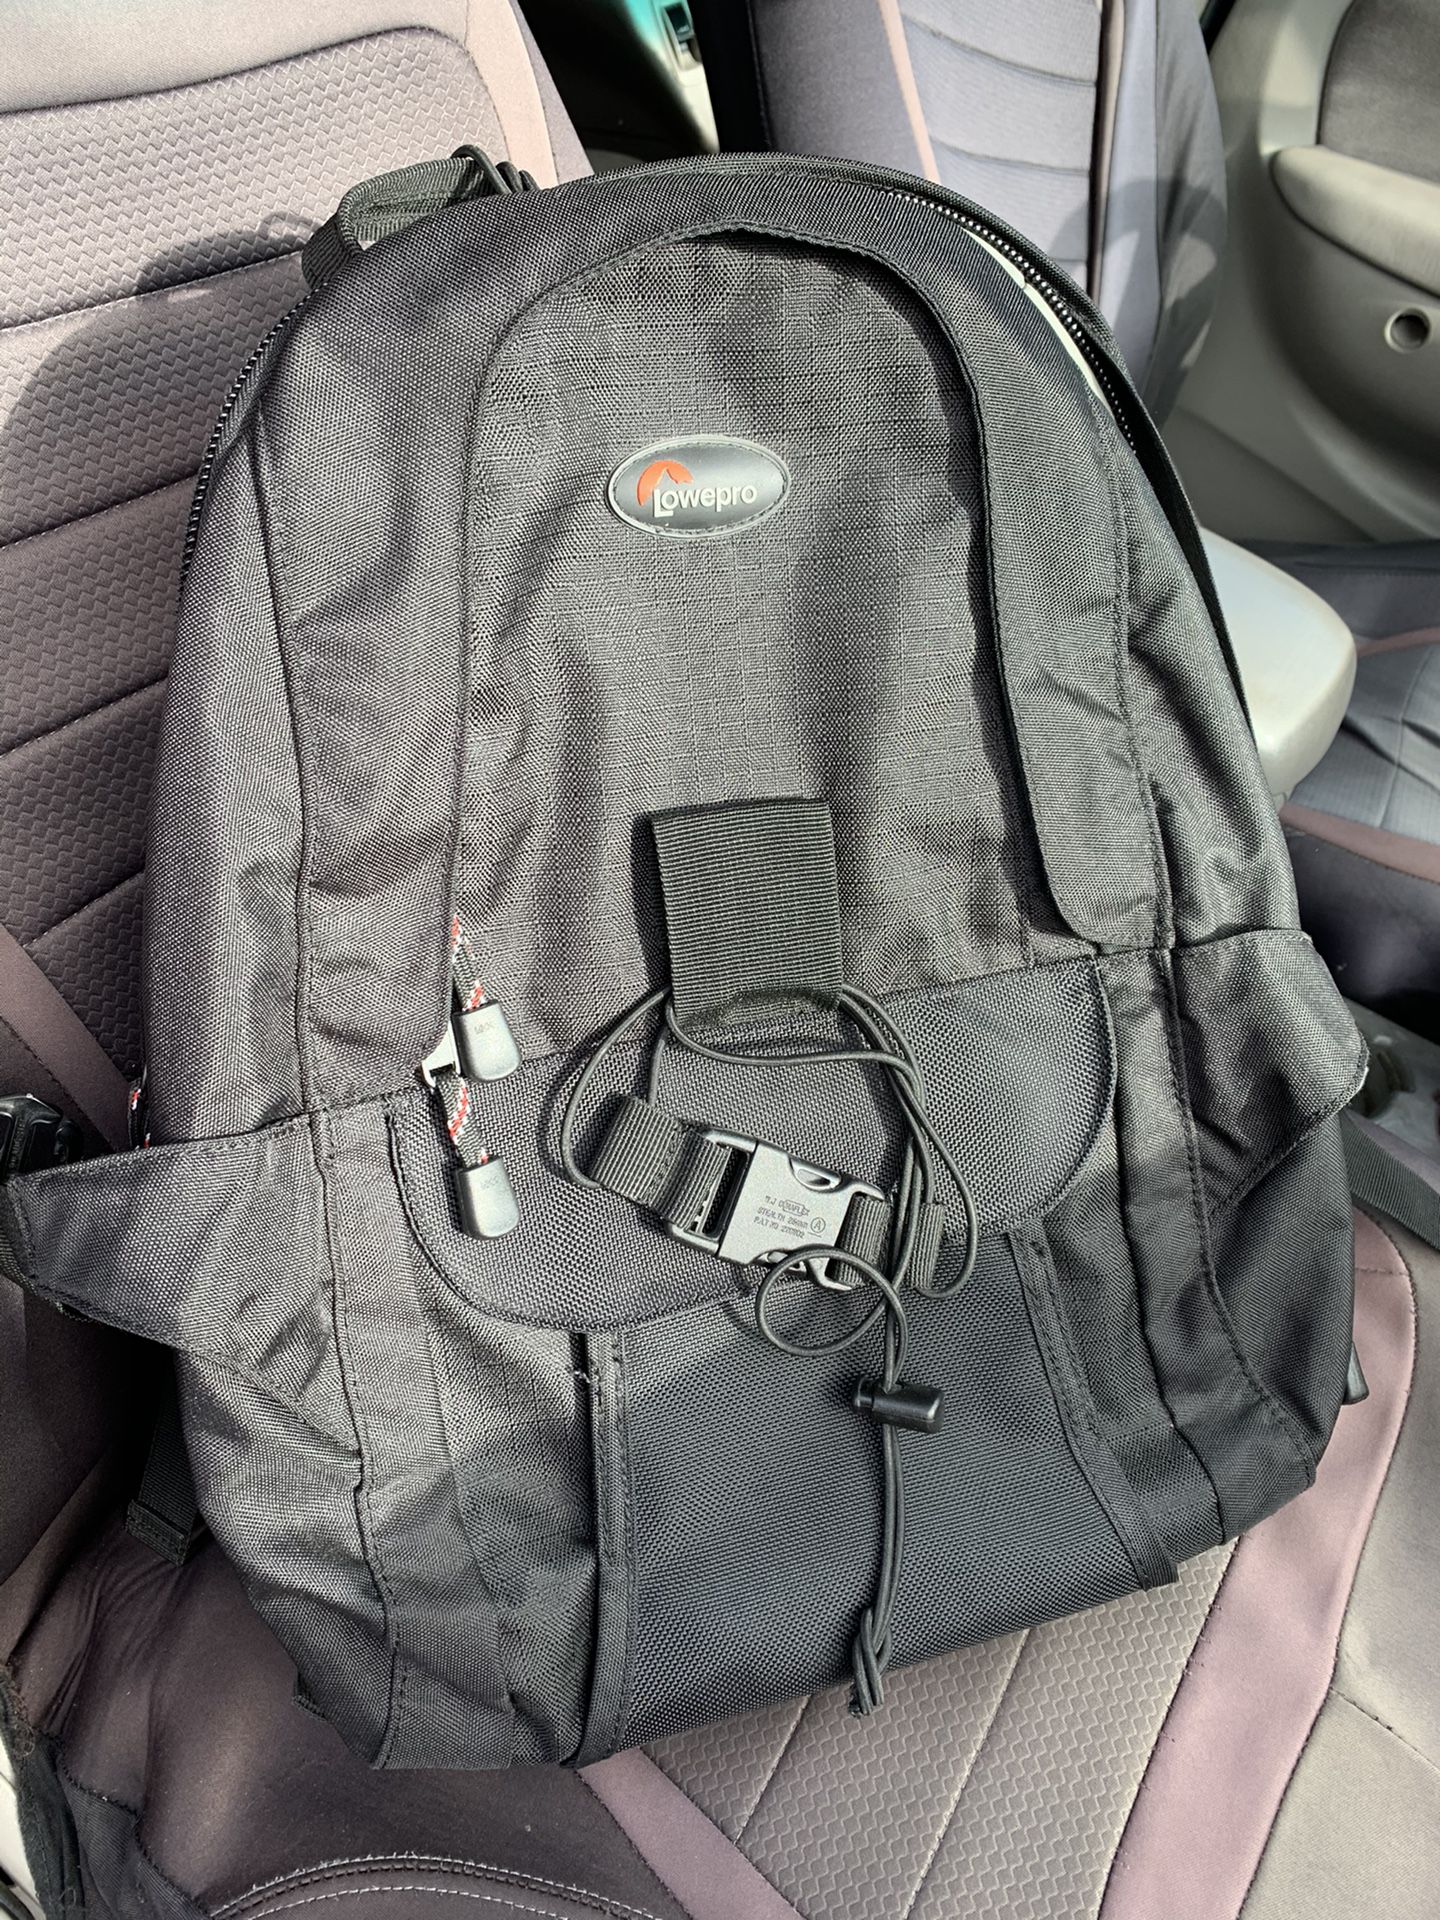 Camera type backpack